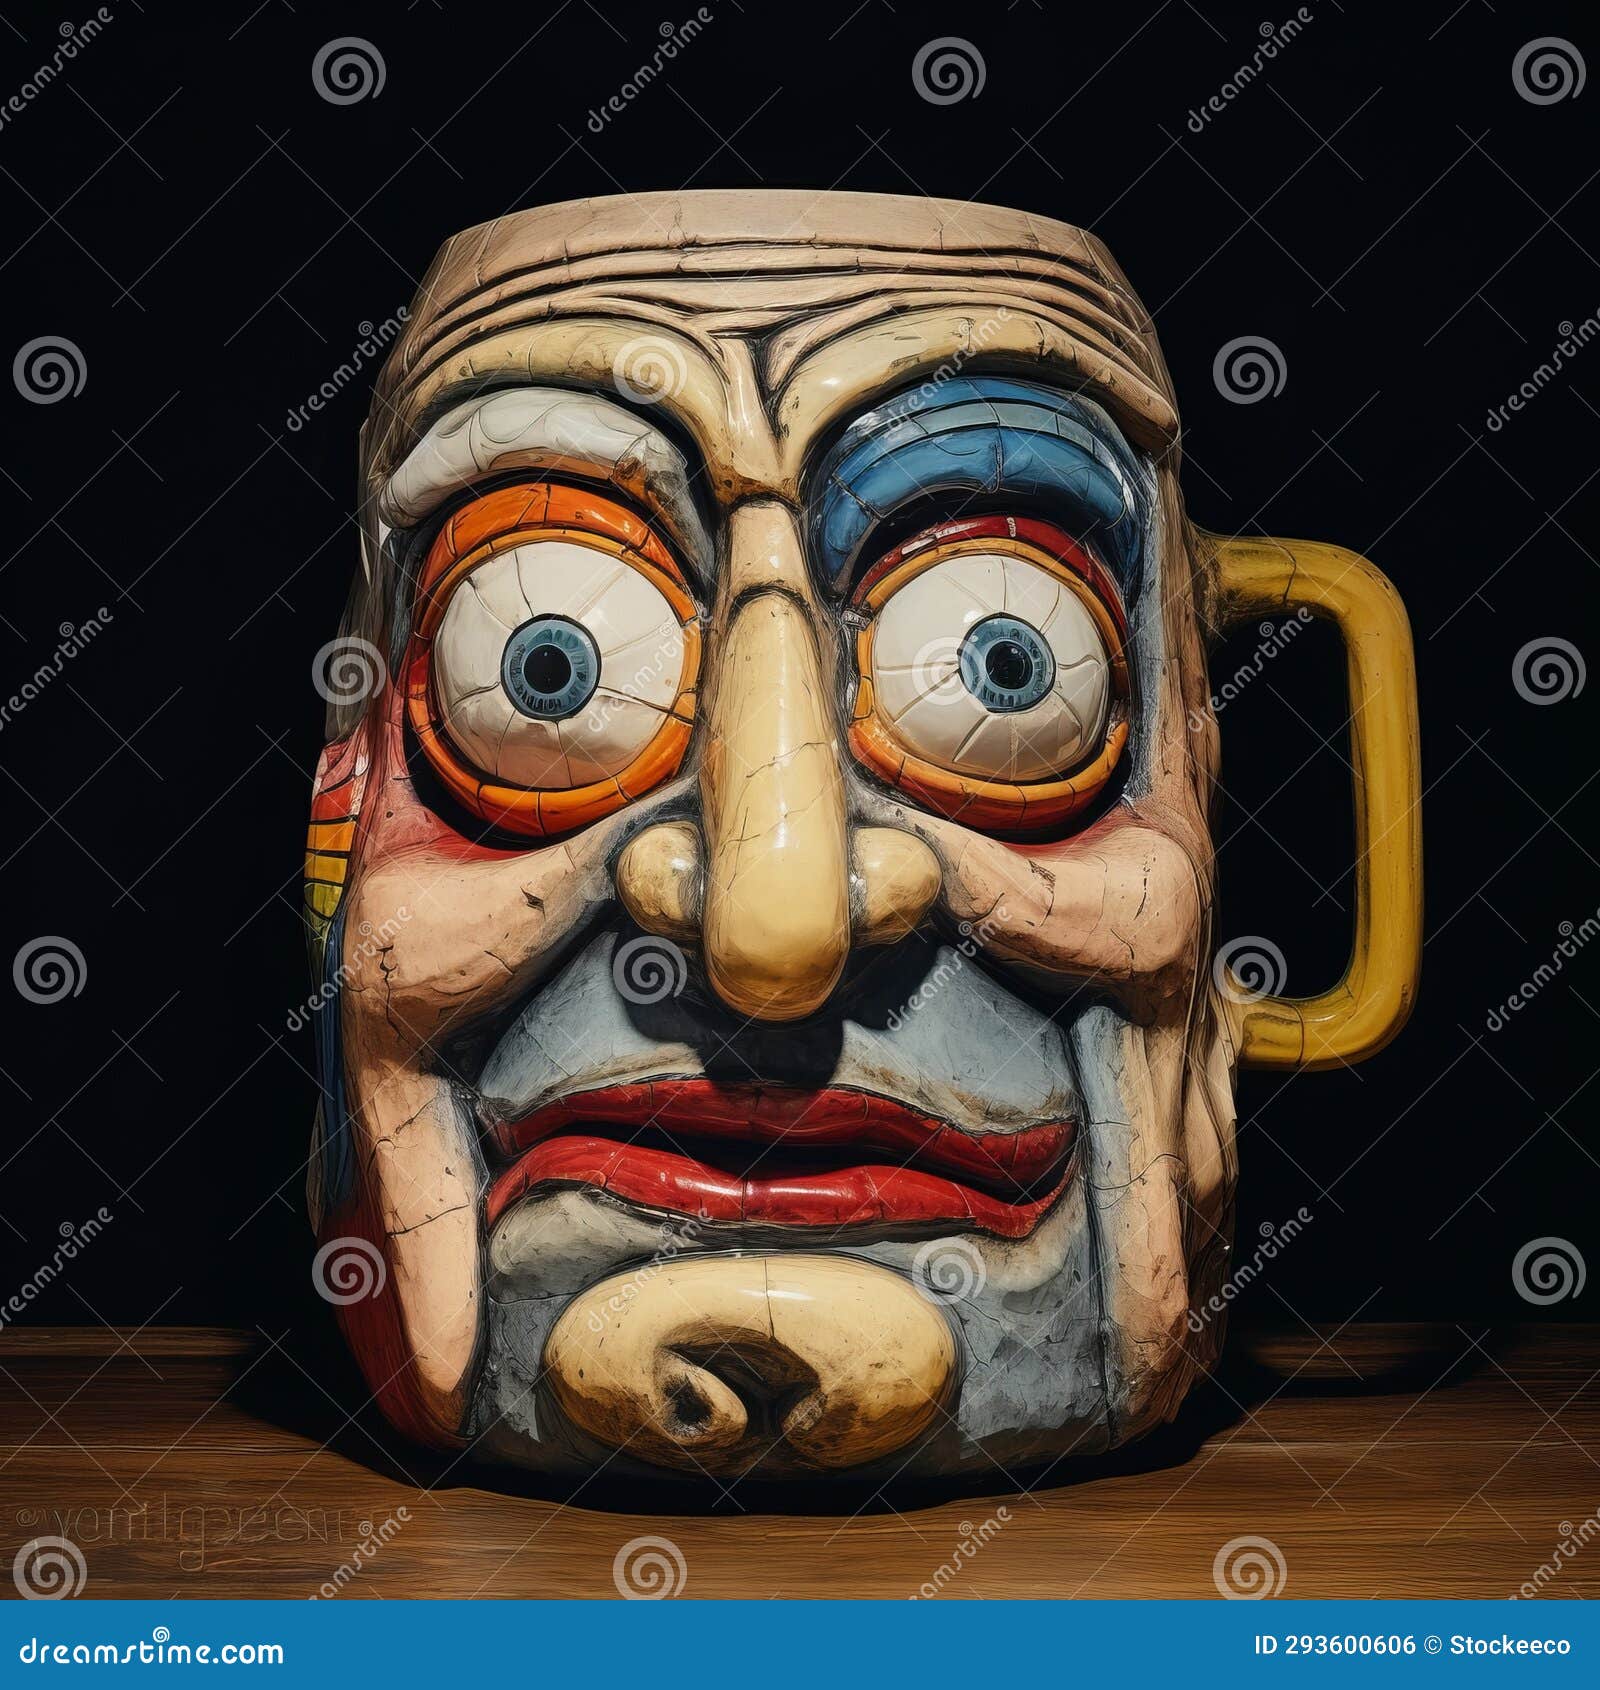 playful morbidity: outsider art inspired beer mug with crazy face